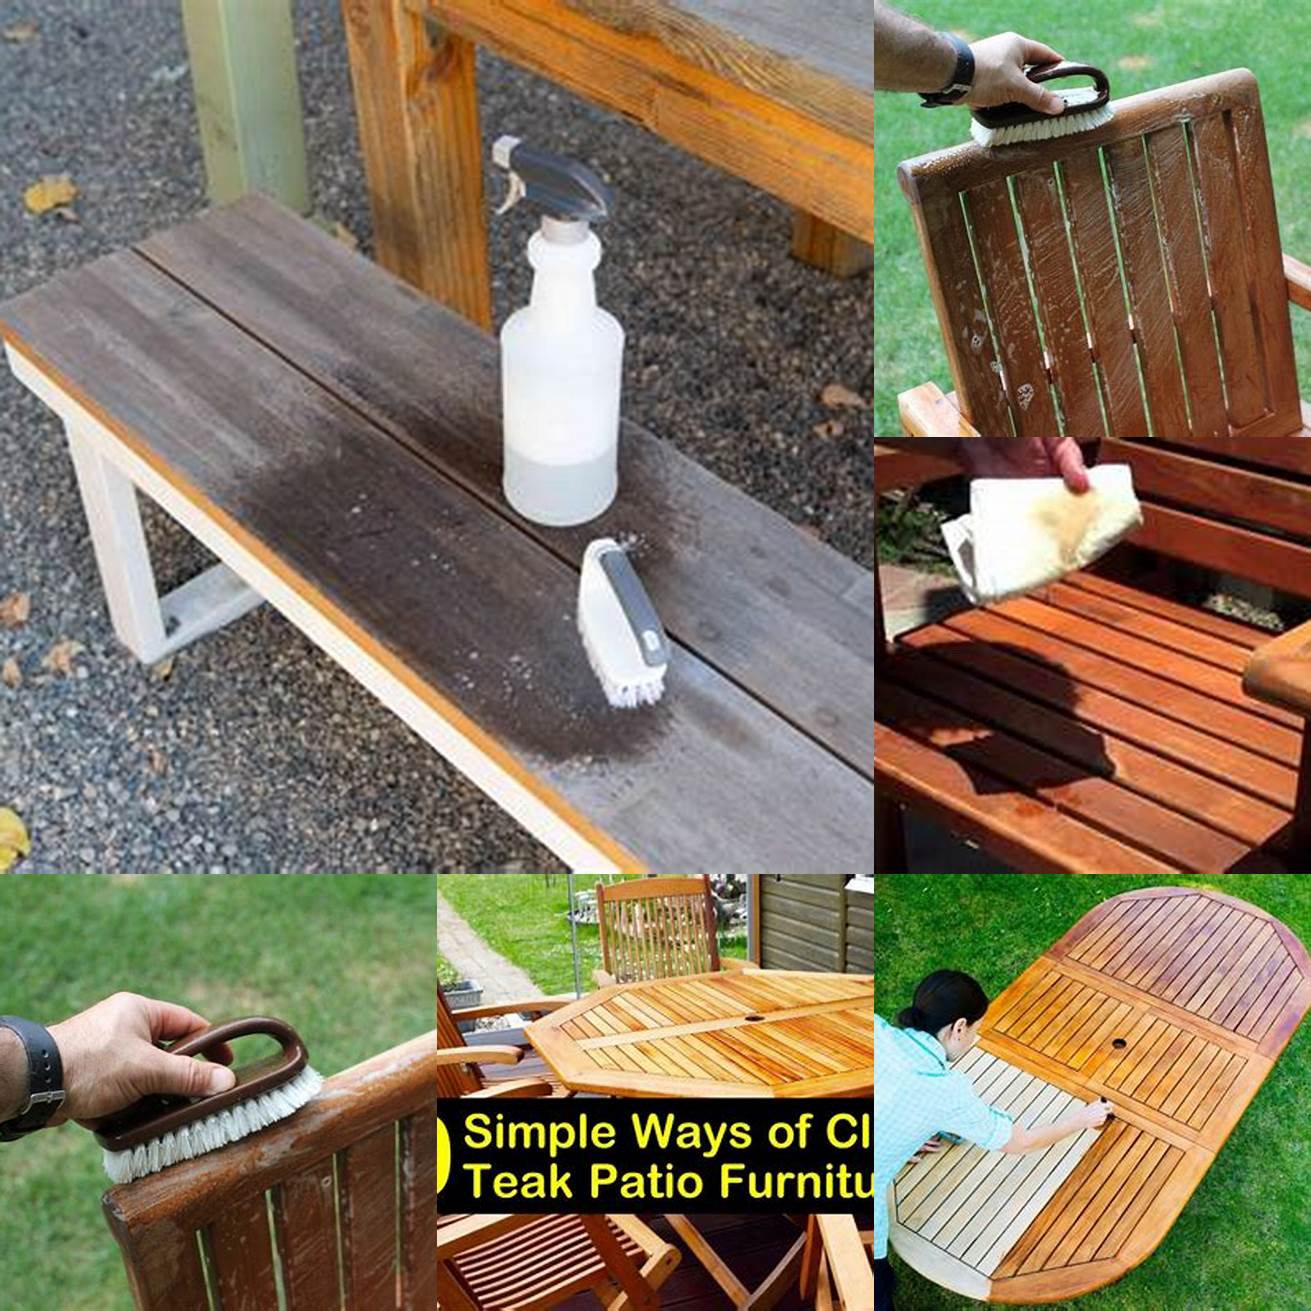 Use a mild soap and warm water to clean your teak furniture